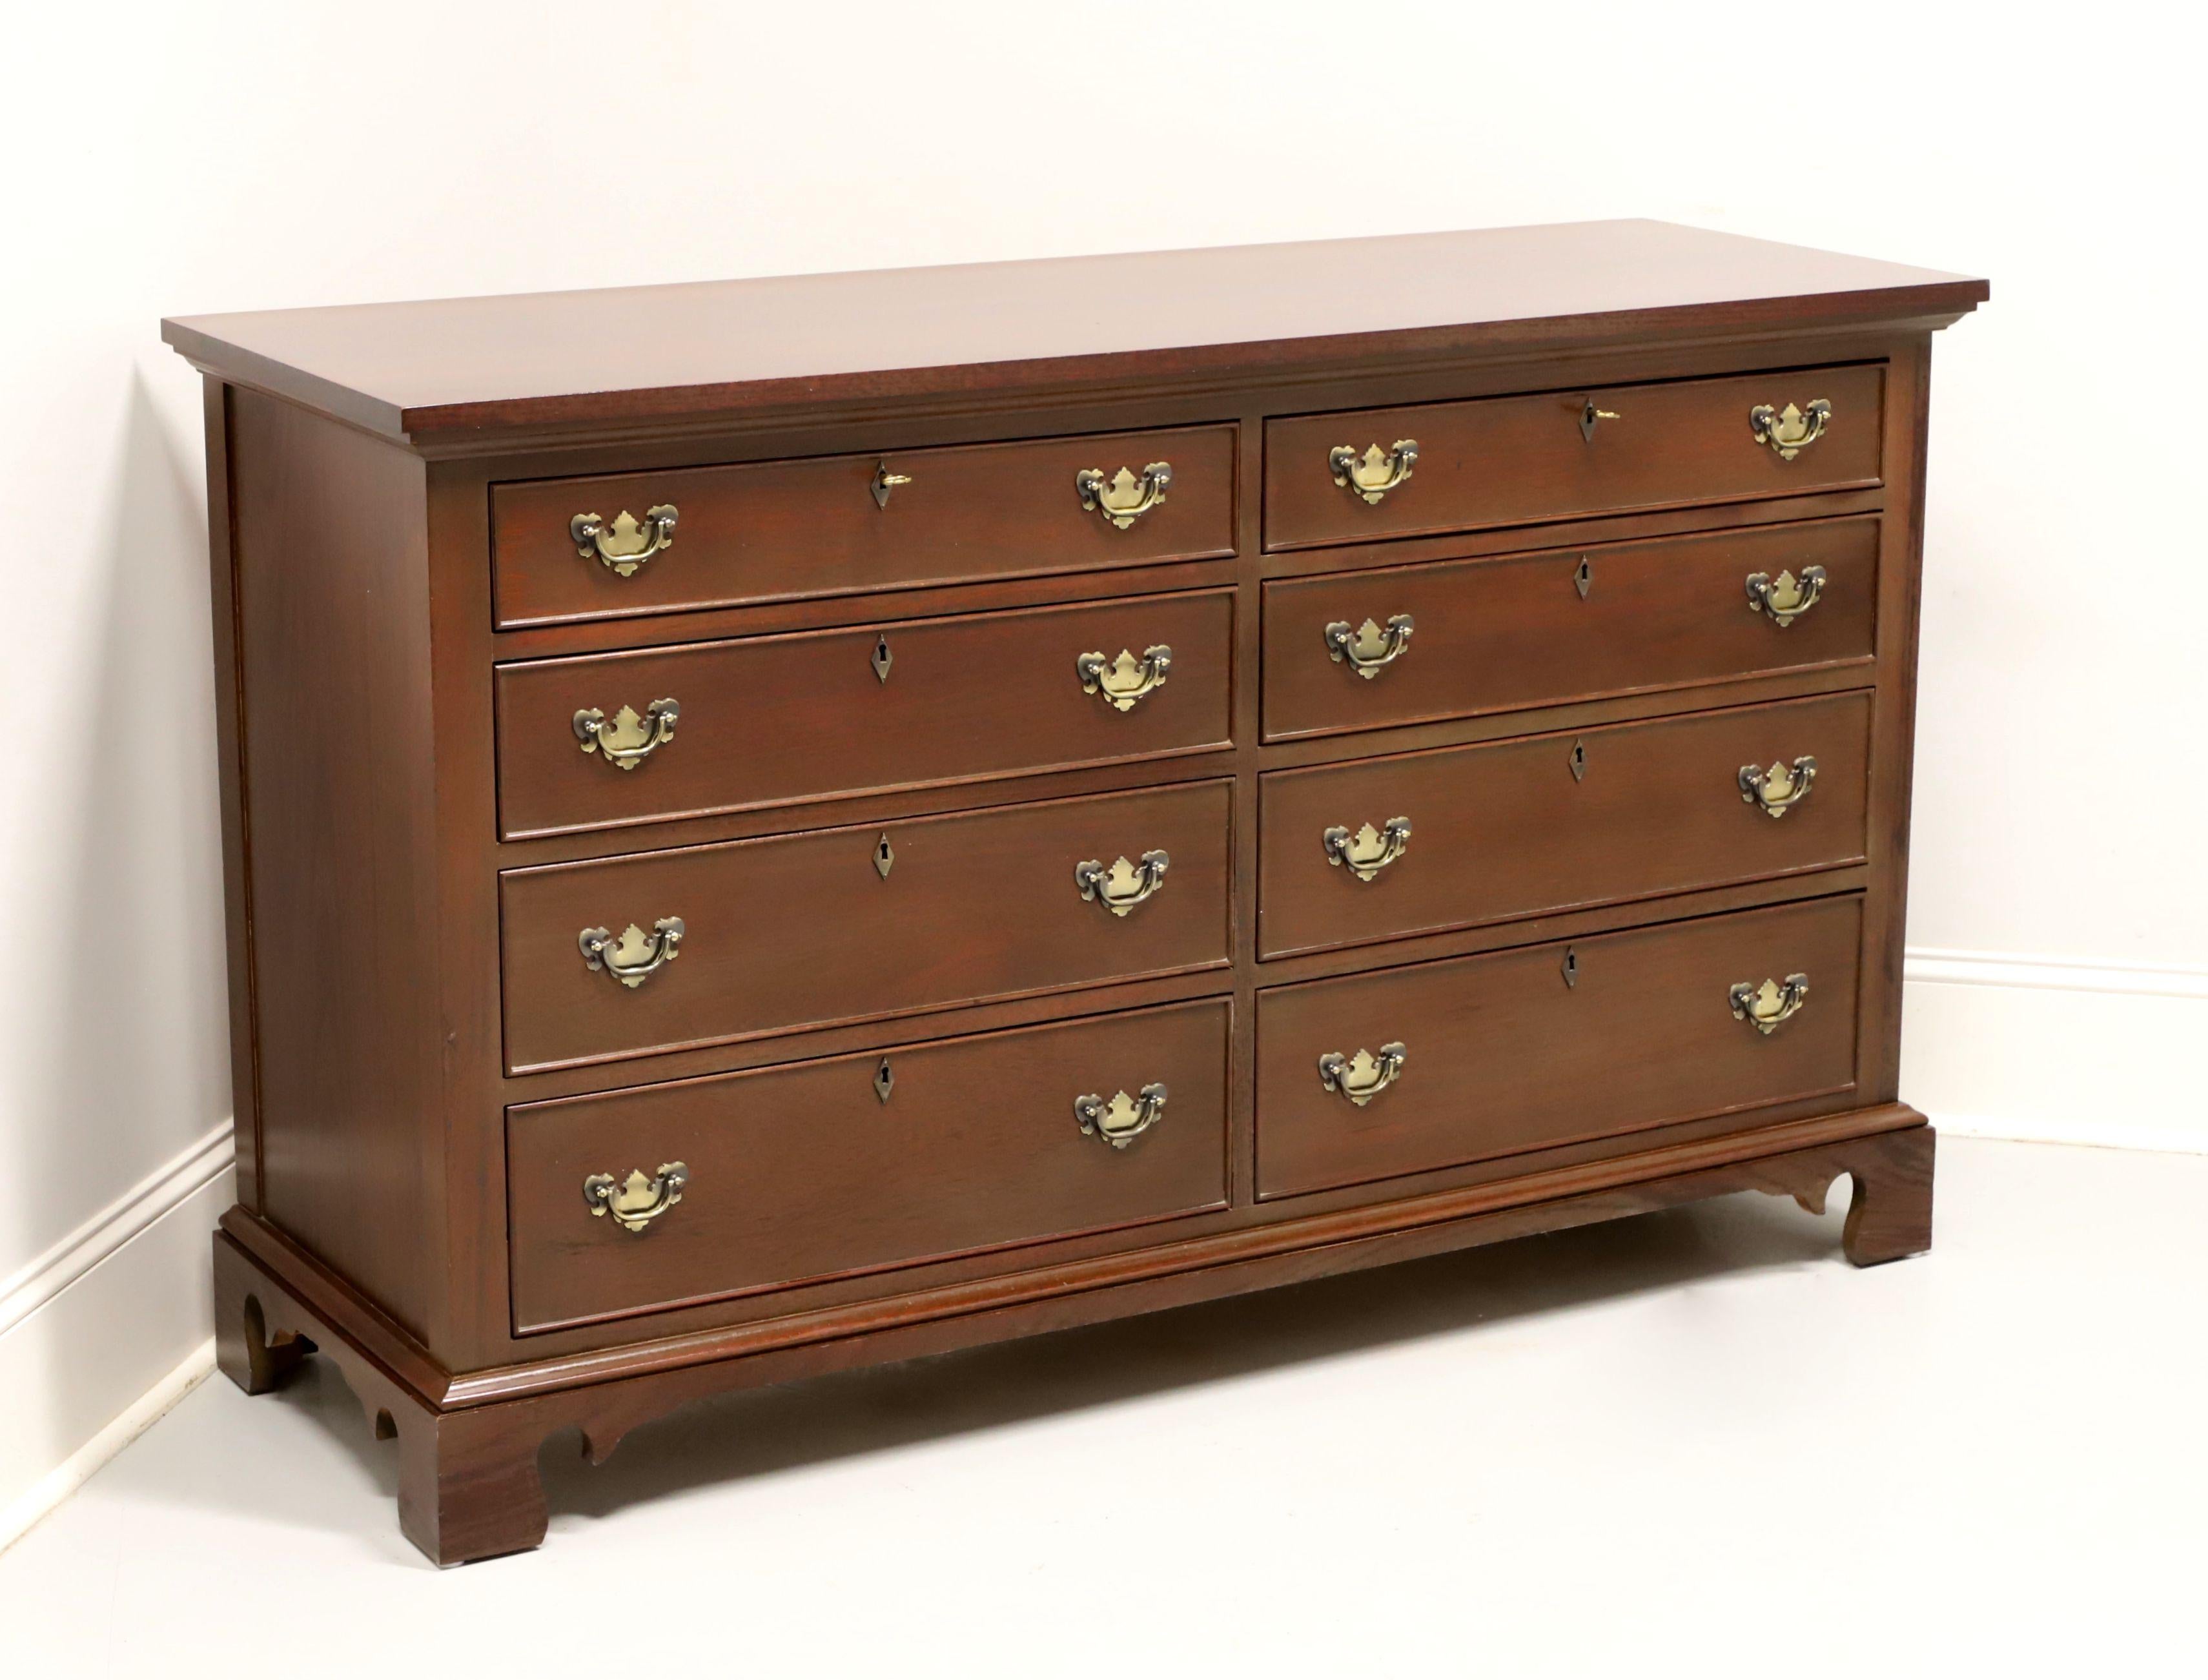 CRAFTIQUE Solid Mahogany Chippendale Double Dresser 5